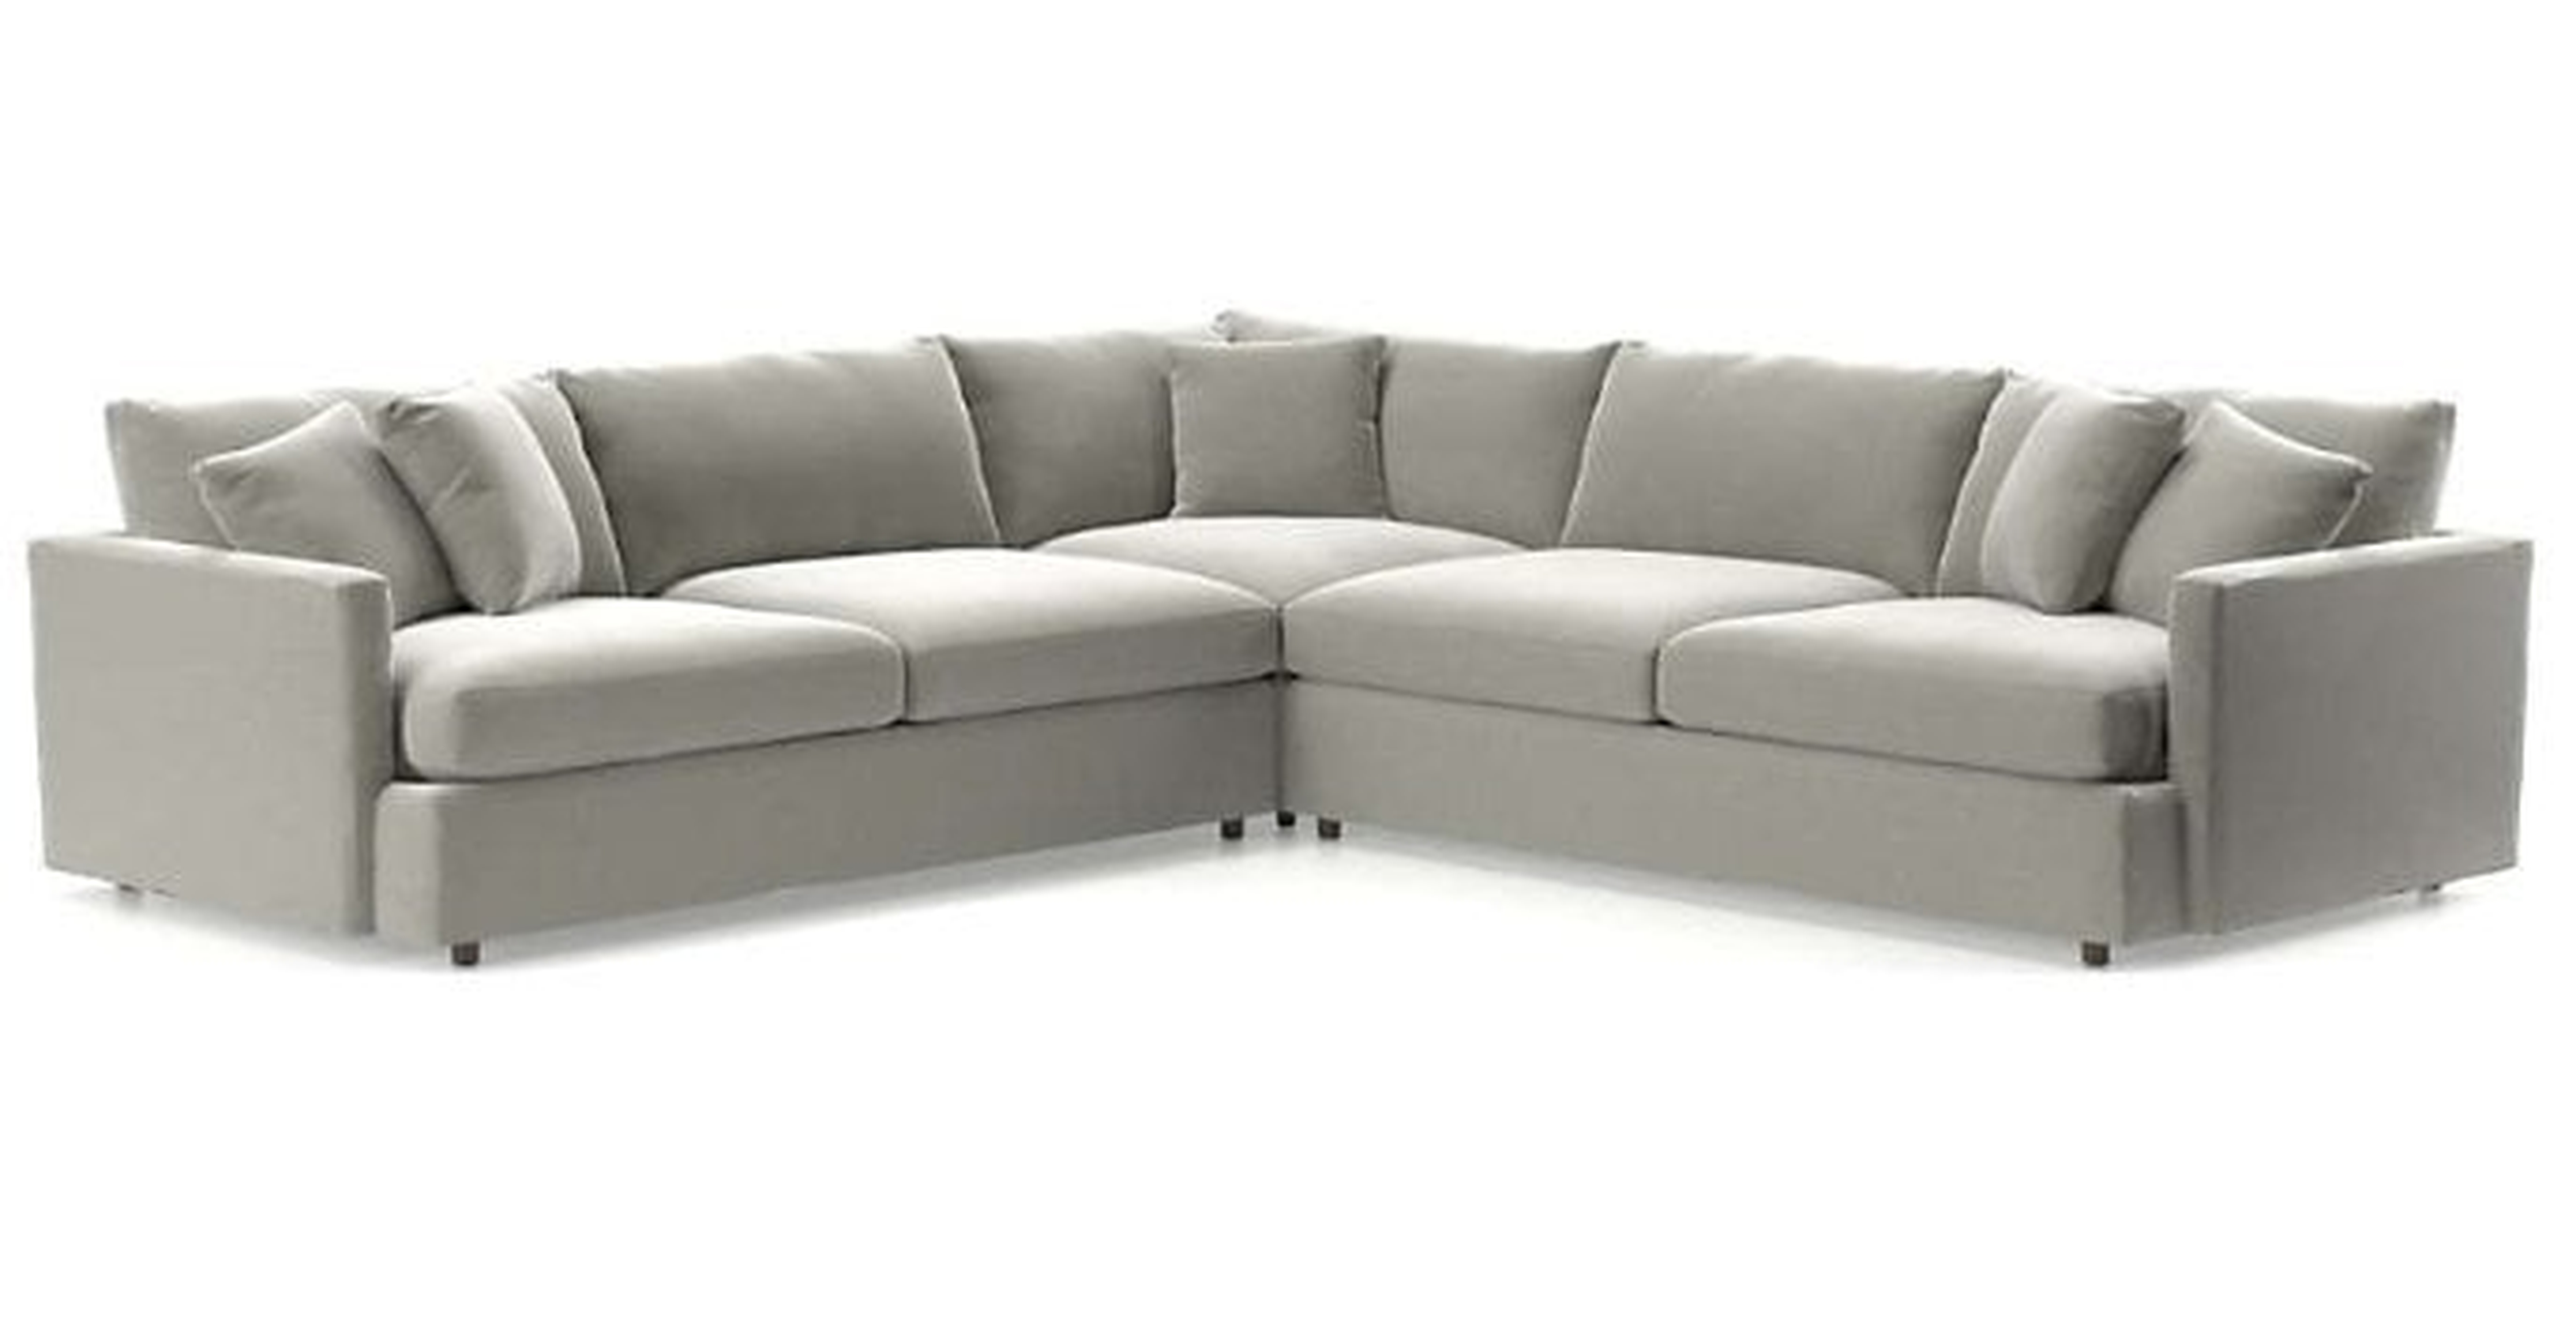 Lounge II 3-Piece Sectional Sofa - View, Grey - Crate and Barrel